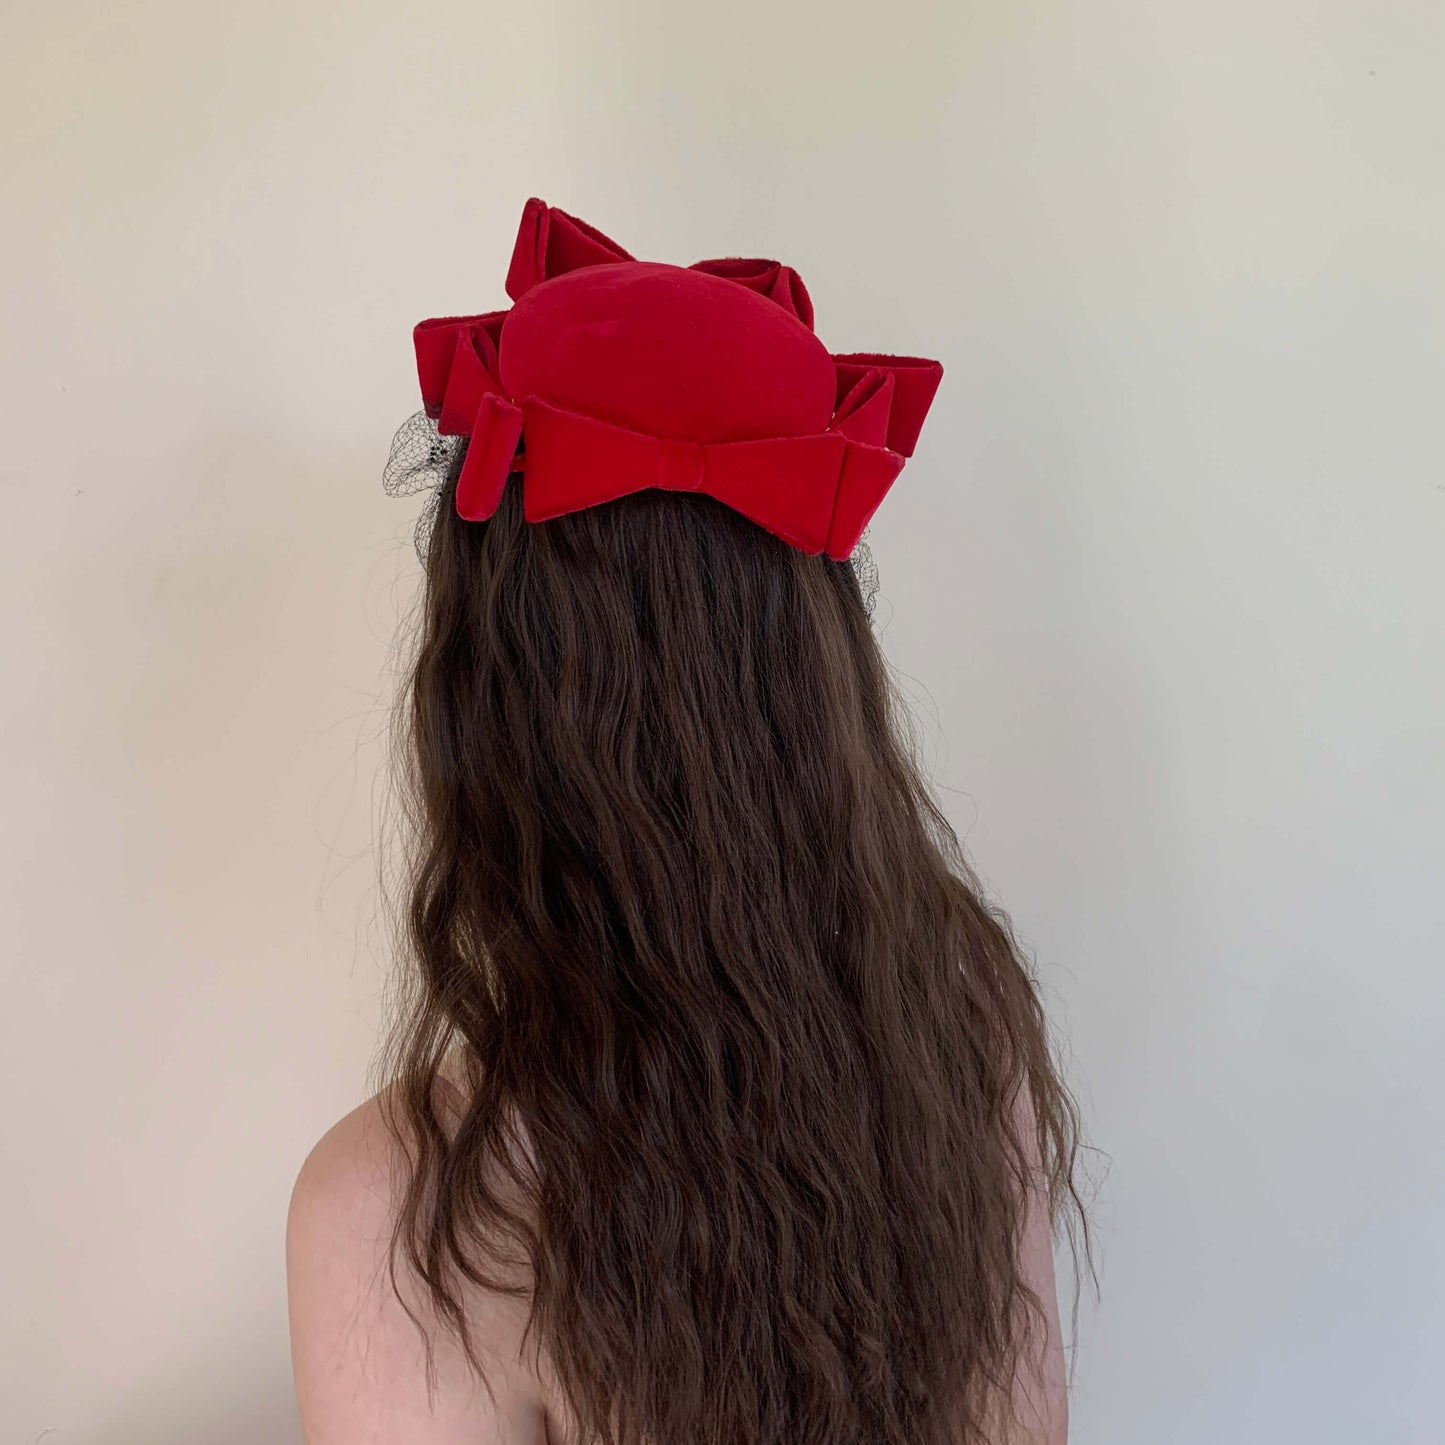 back view of vintage red hat with bows